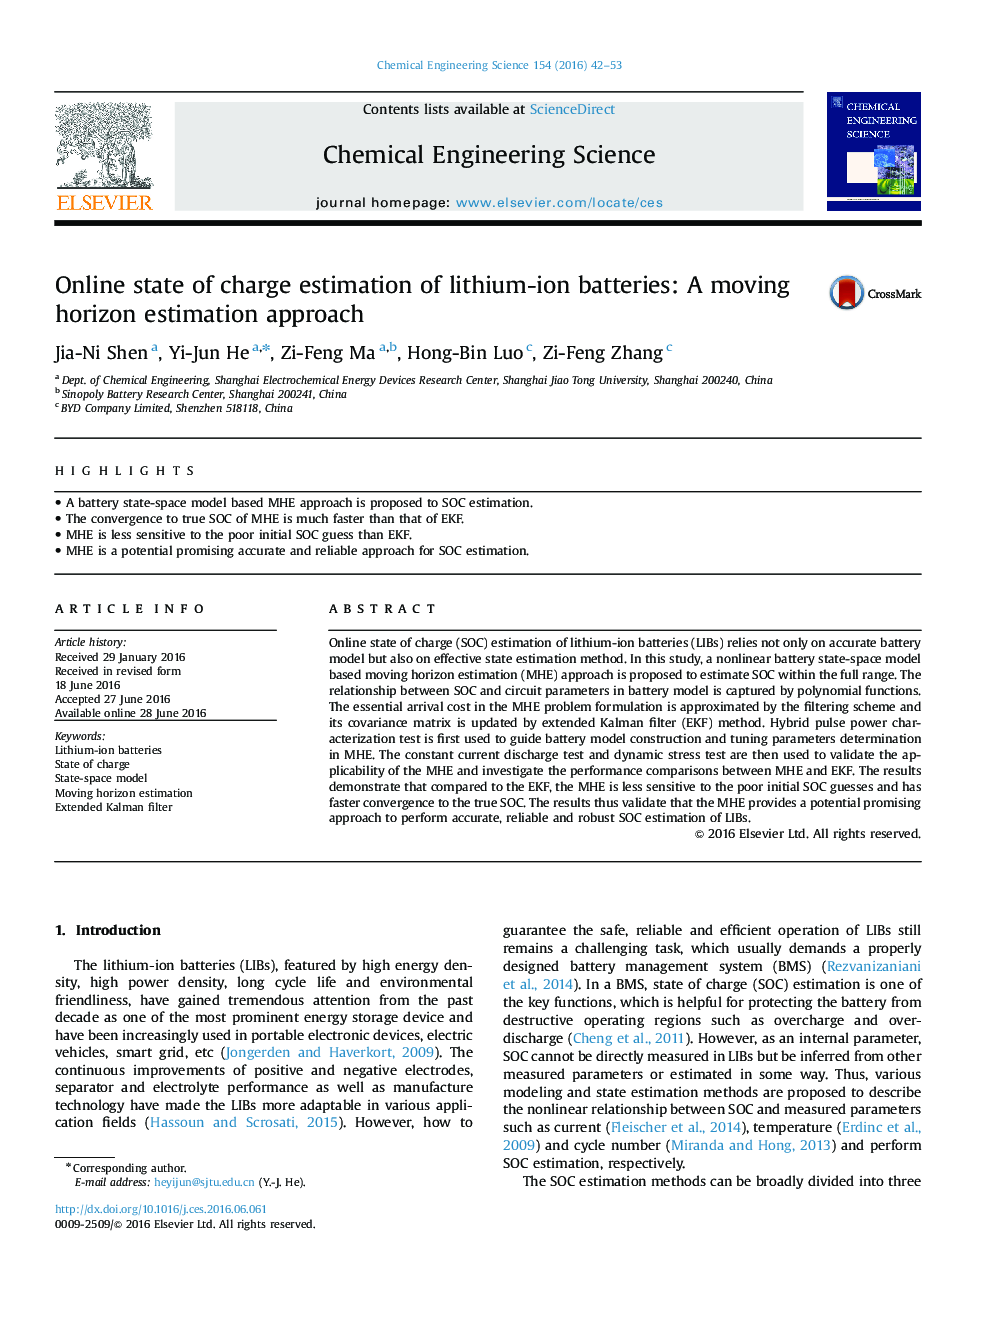 Online state of charge estimation of lithium-ion batteries: A moving horizon estimation approach